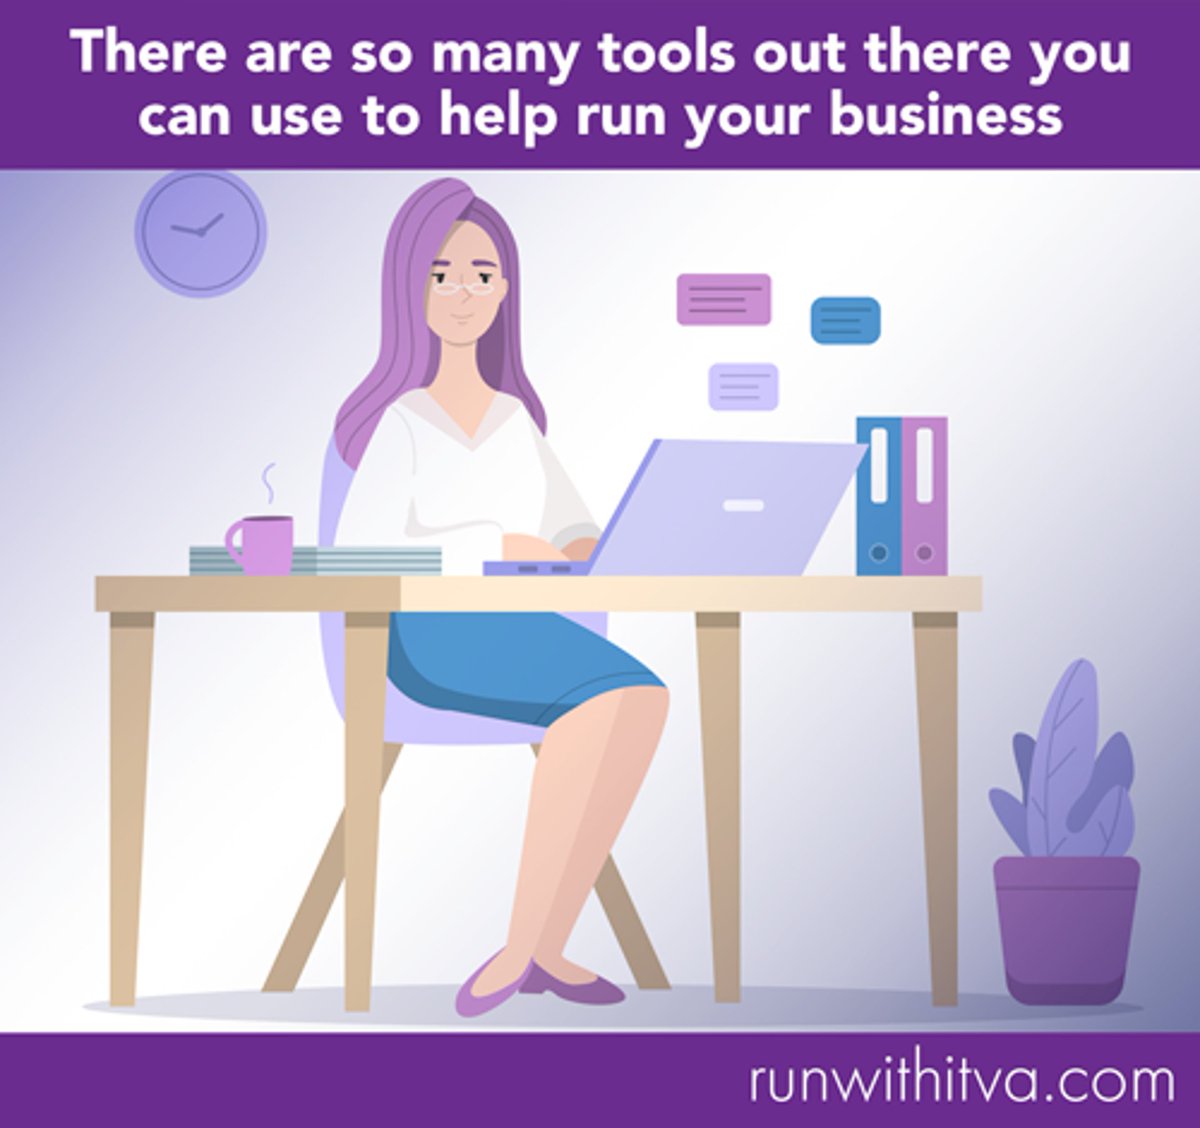 I'm often asked what tools and resources I recommend for various business needs. Go here to see the list of resources I recommend 👇 runwithitva.com/resources/ #growbusiness #growthhack #virtualassistance #growyourbusinessonline #strategicplanning #socialmediagrowth